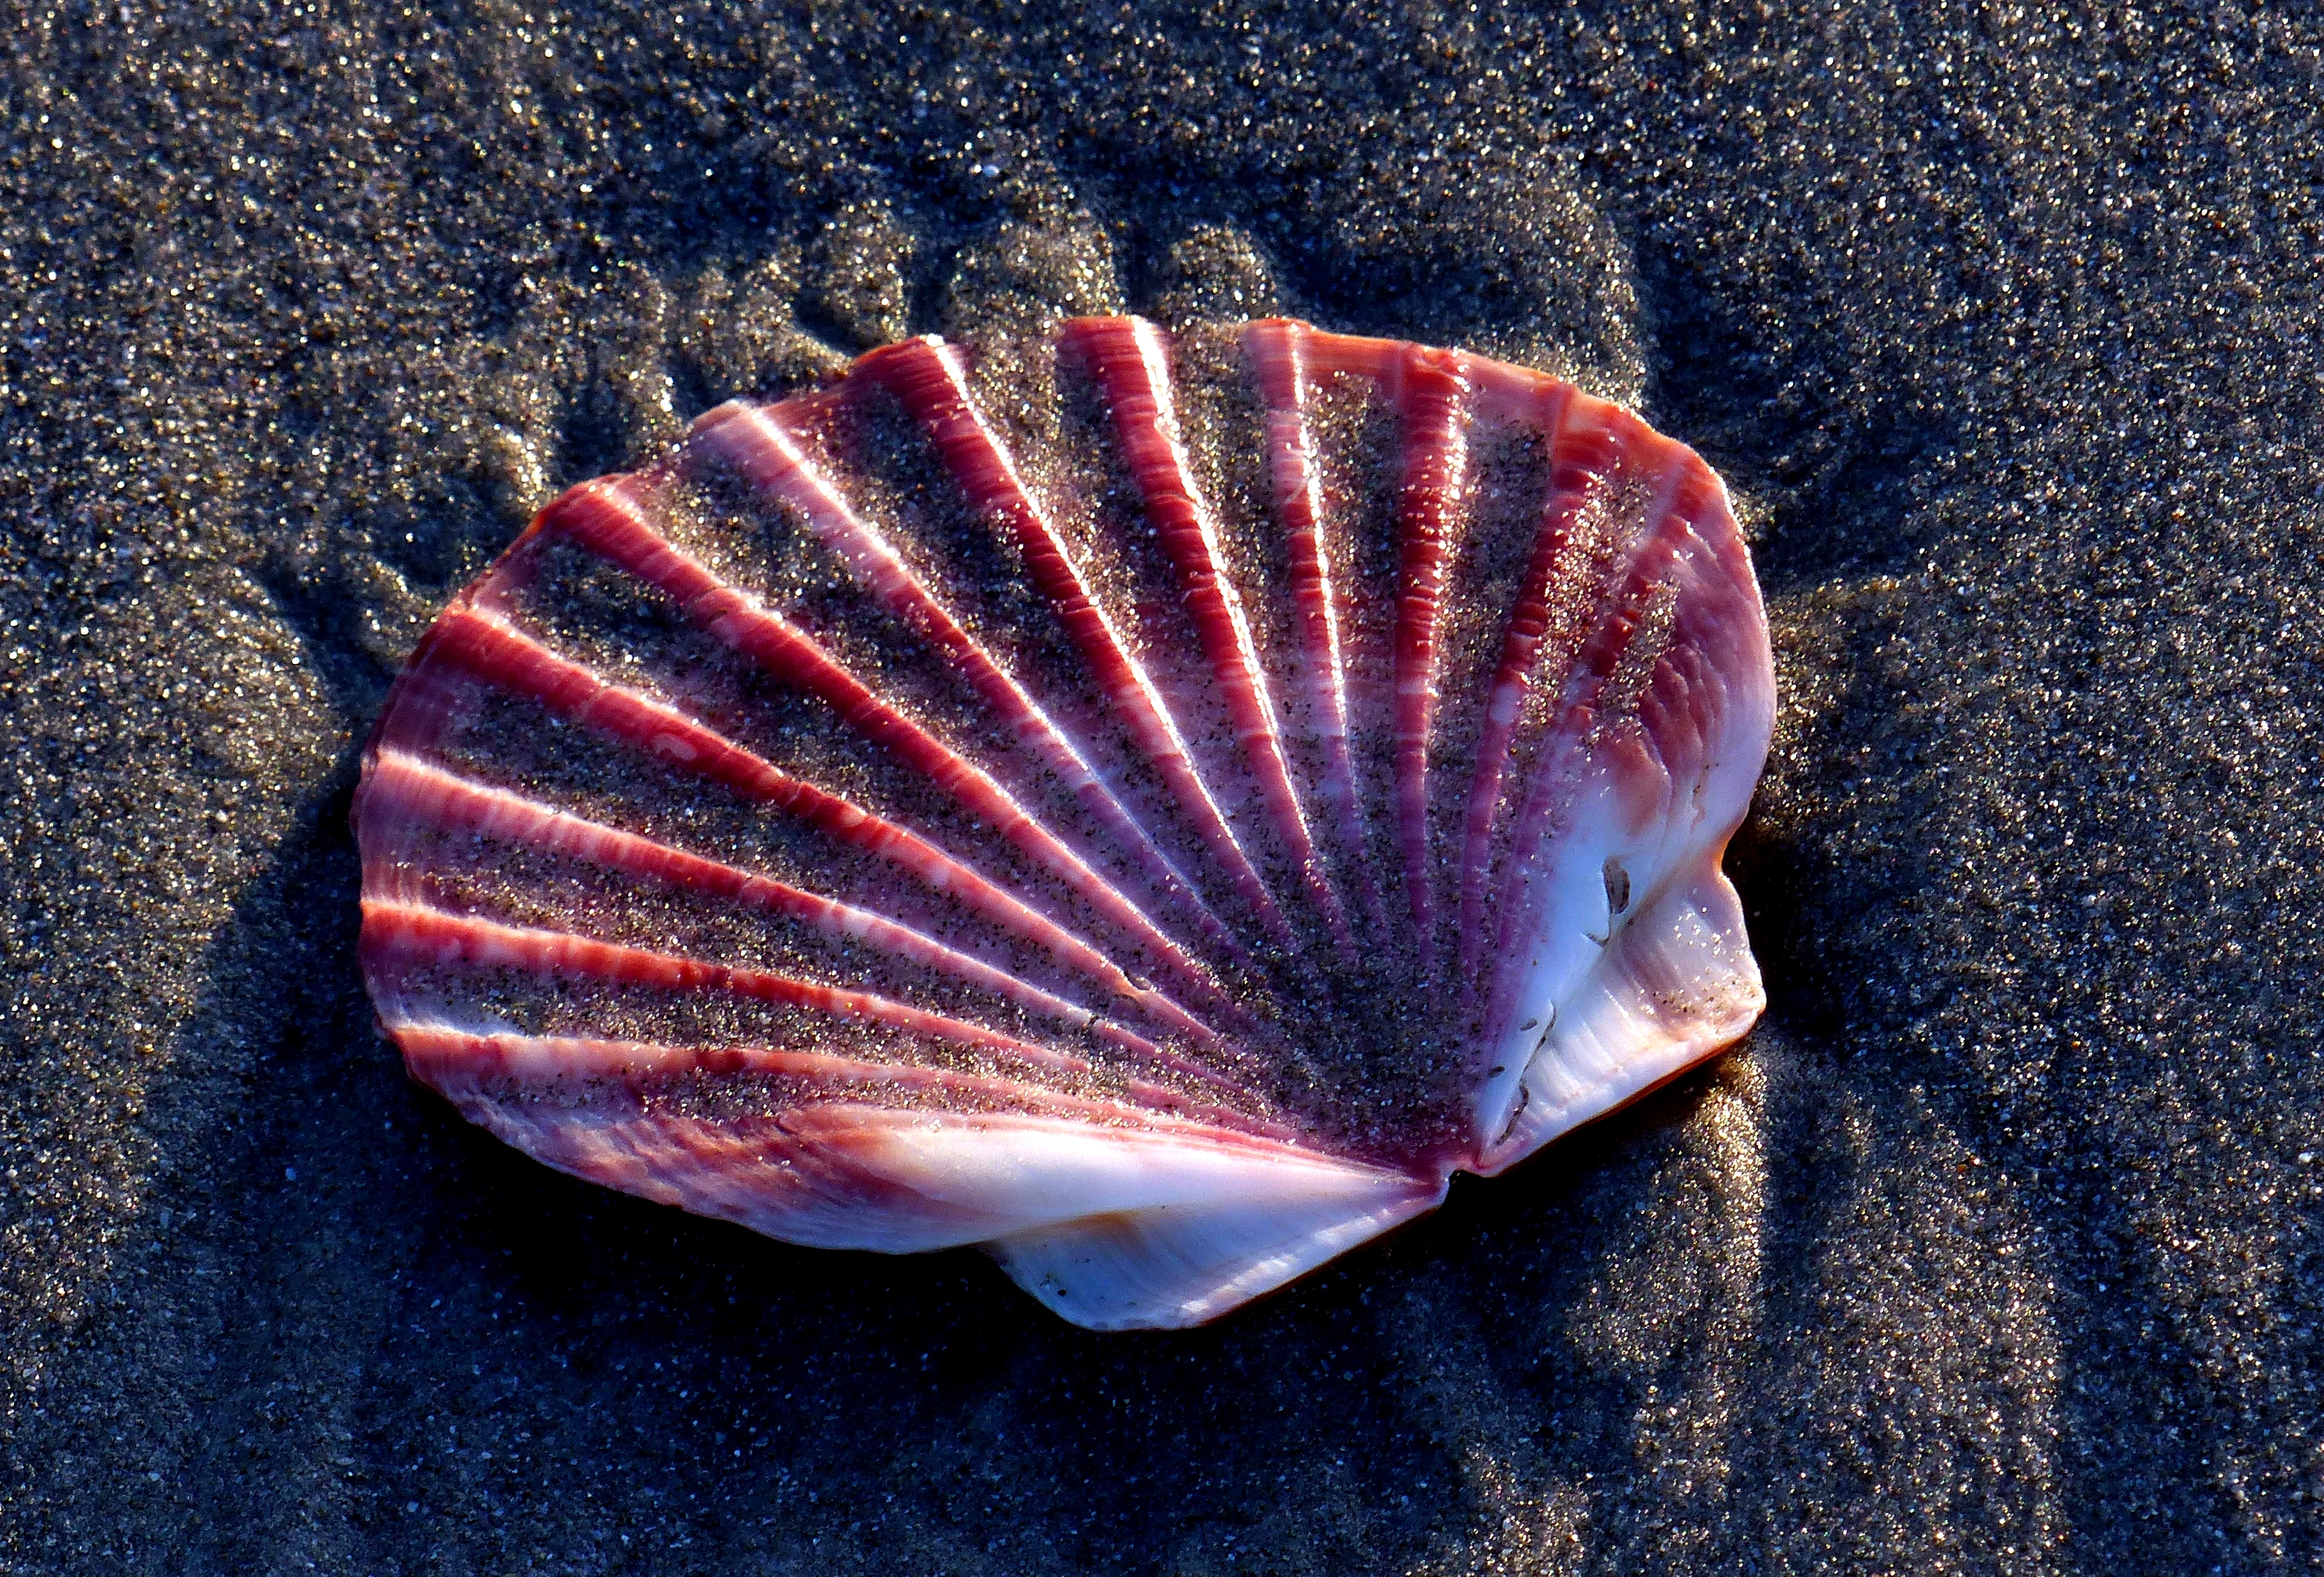 Scallop shell on the sands